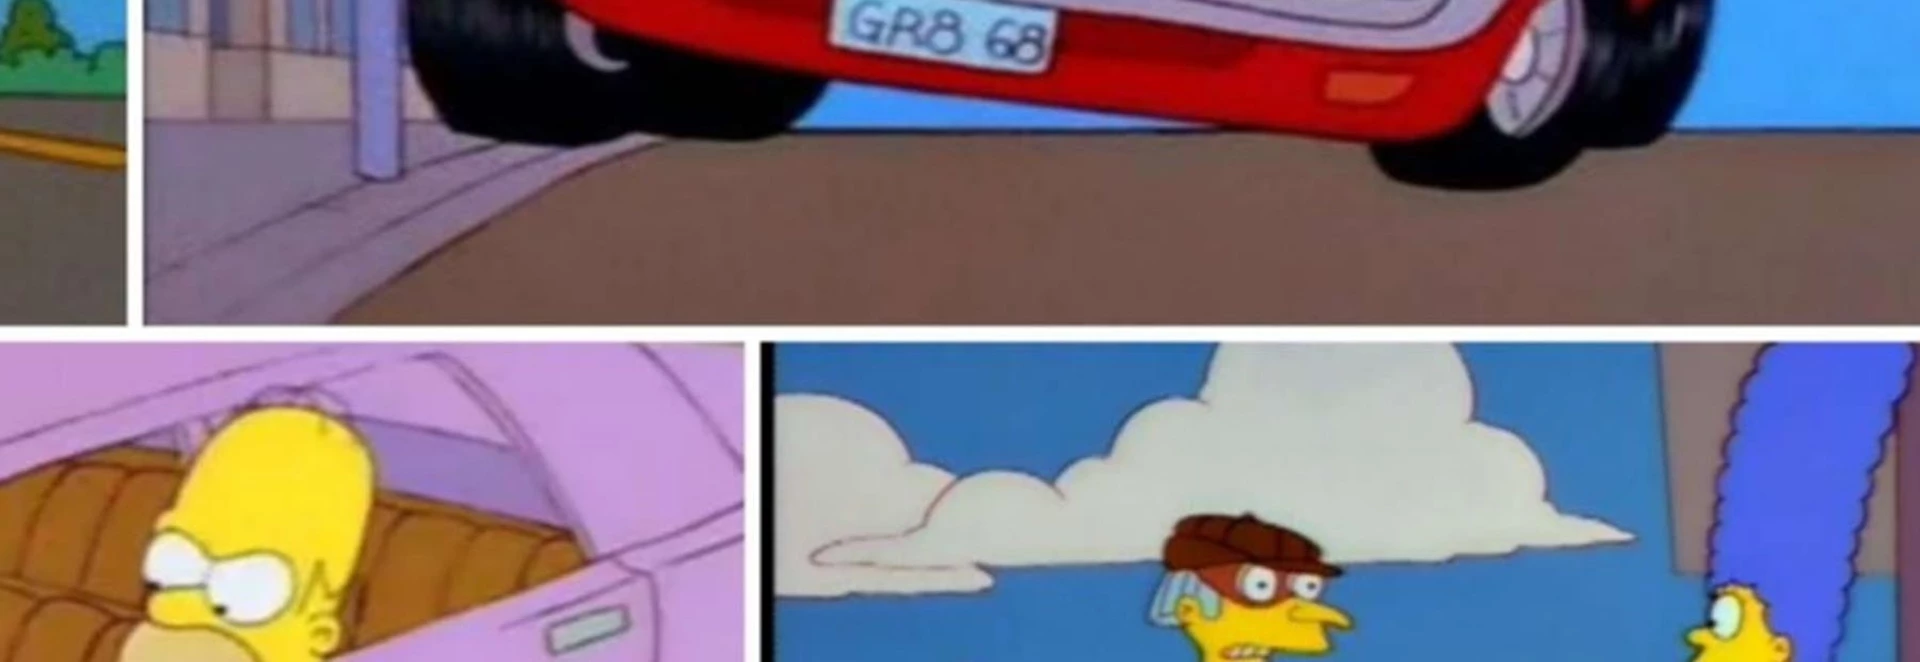 Five things The Simpsons correctly predicted about cars